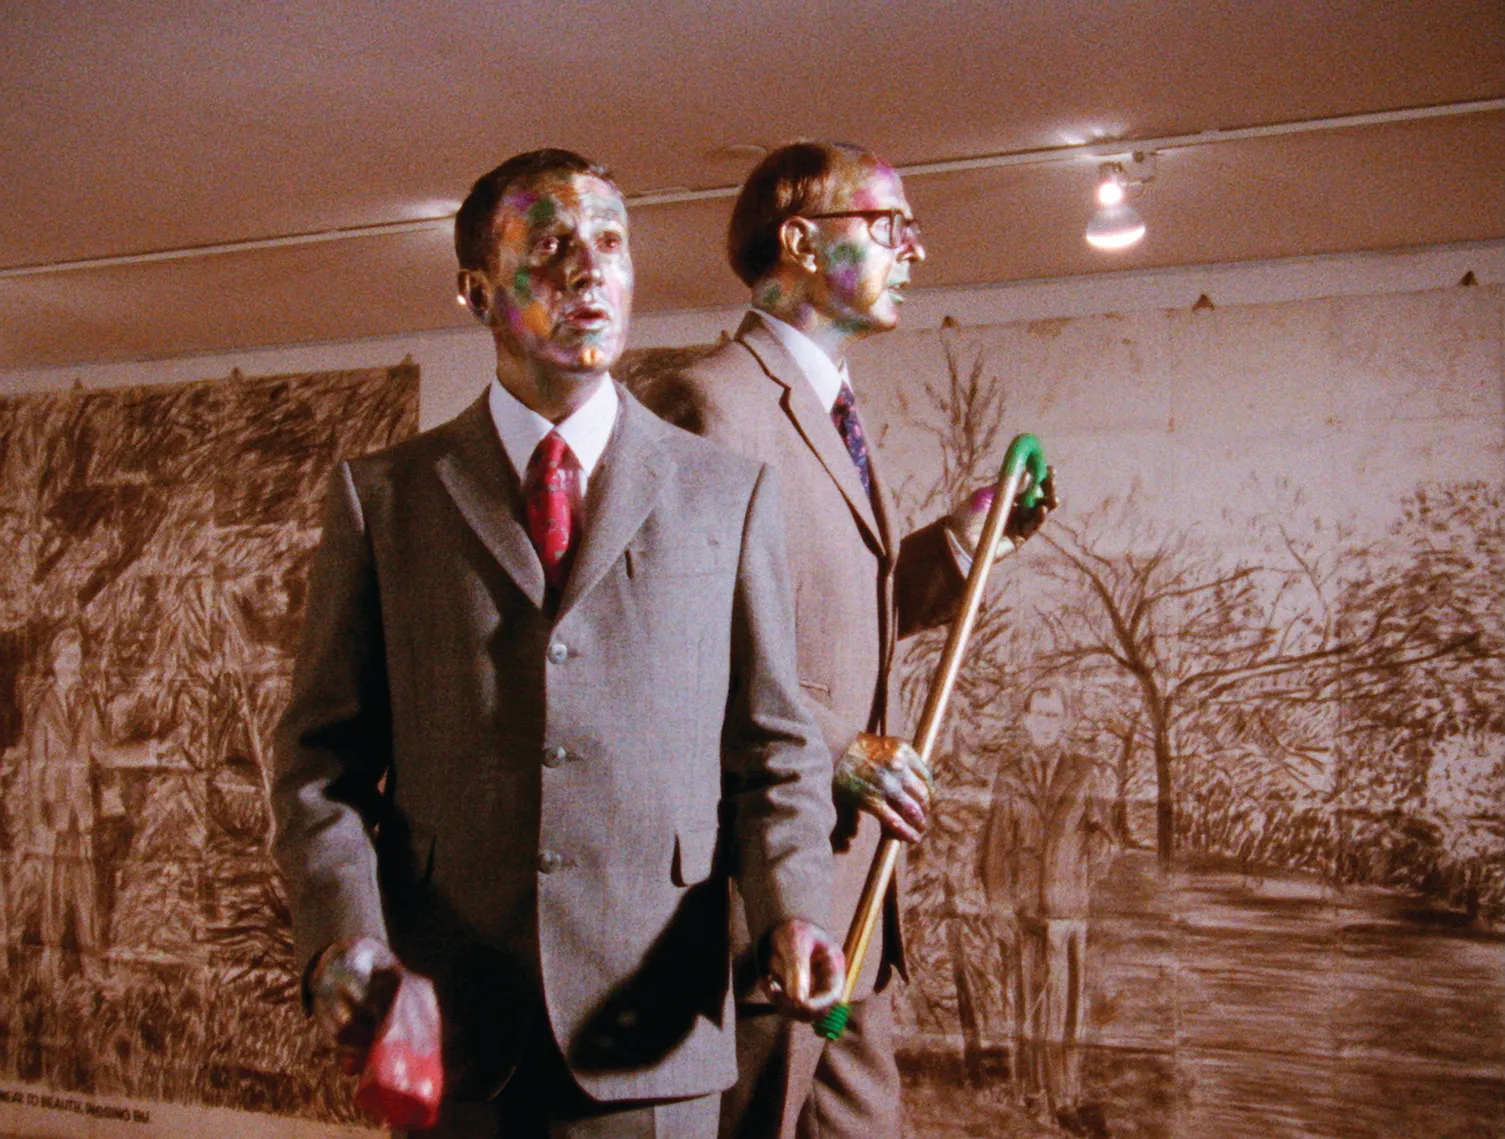 Gilbert & George, The Singing Sculpture, rok 1992. (Fot. © Gilbert & George. Courtesy White Cube)